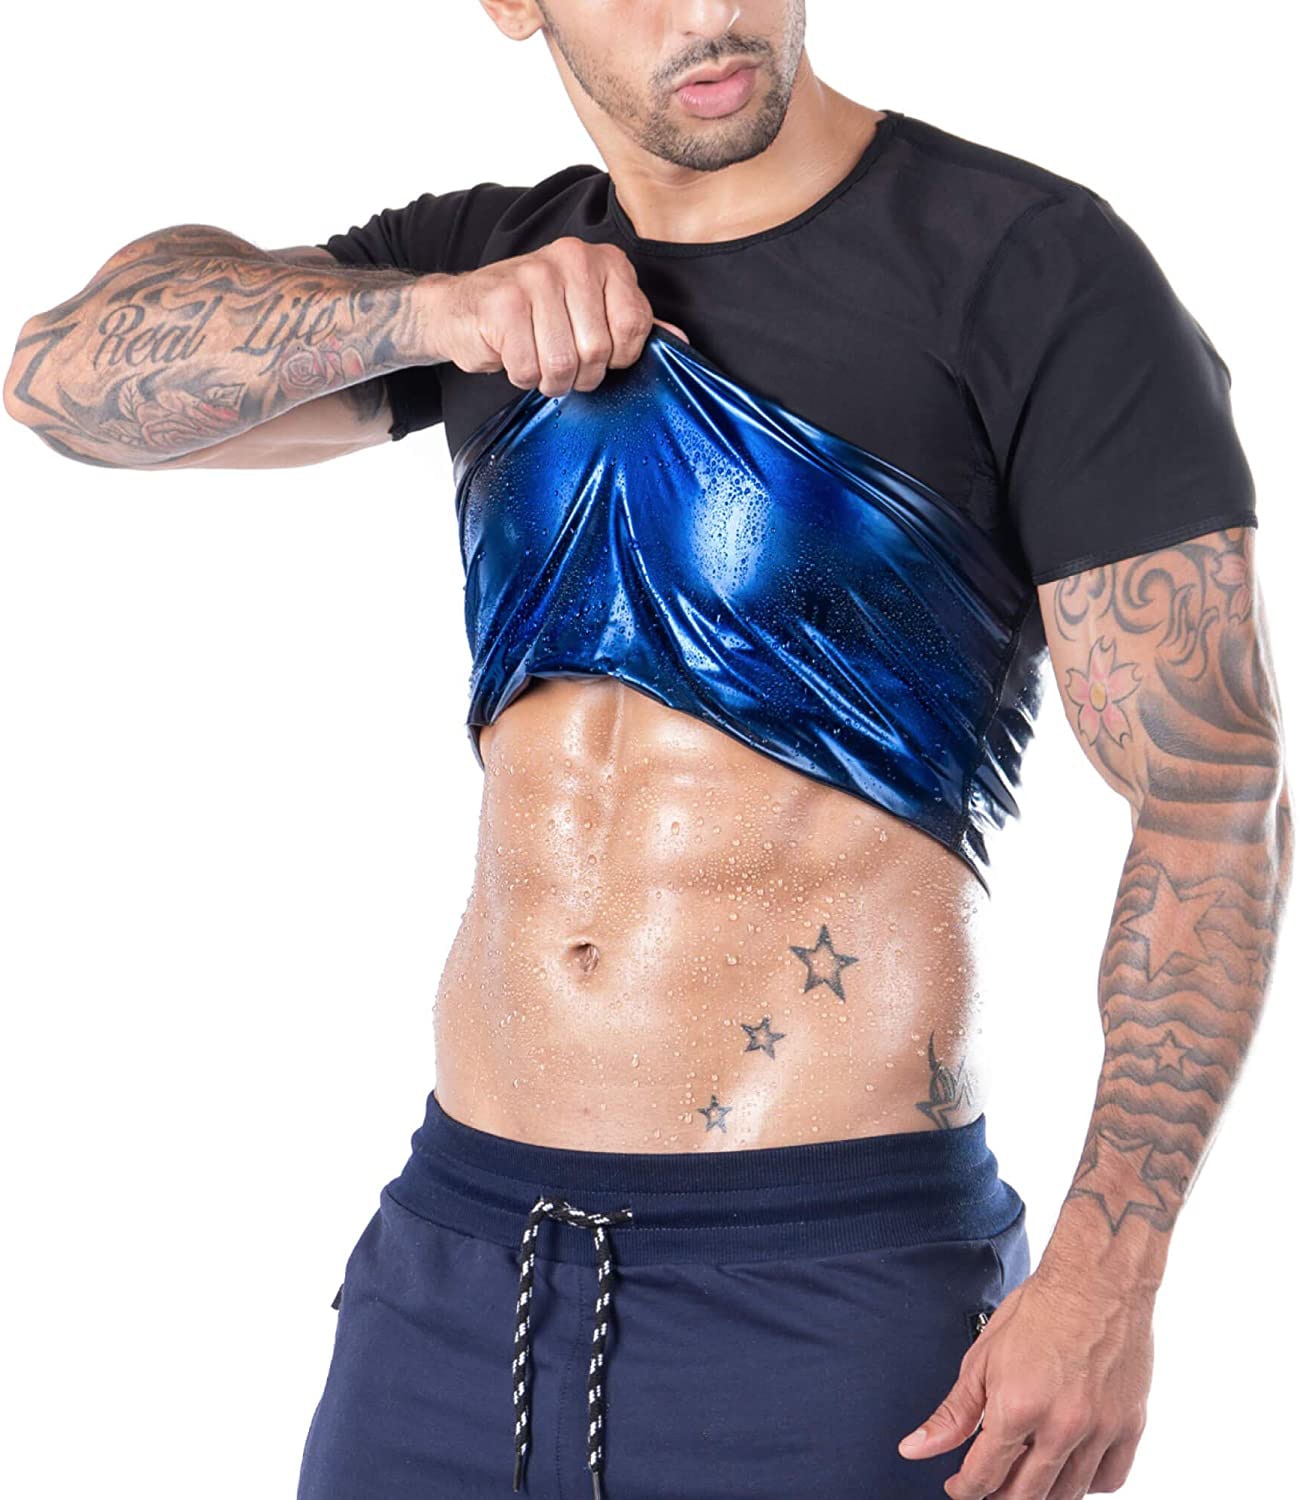 Men Sauna Suit Heat Trapping Shapewear Sweat Body Shaper Vest Slimmer Saunasuits Compression Thermal Top Fitness Workout Shirt